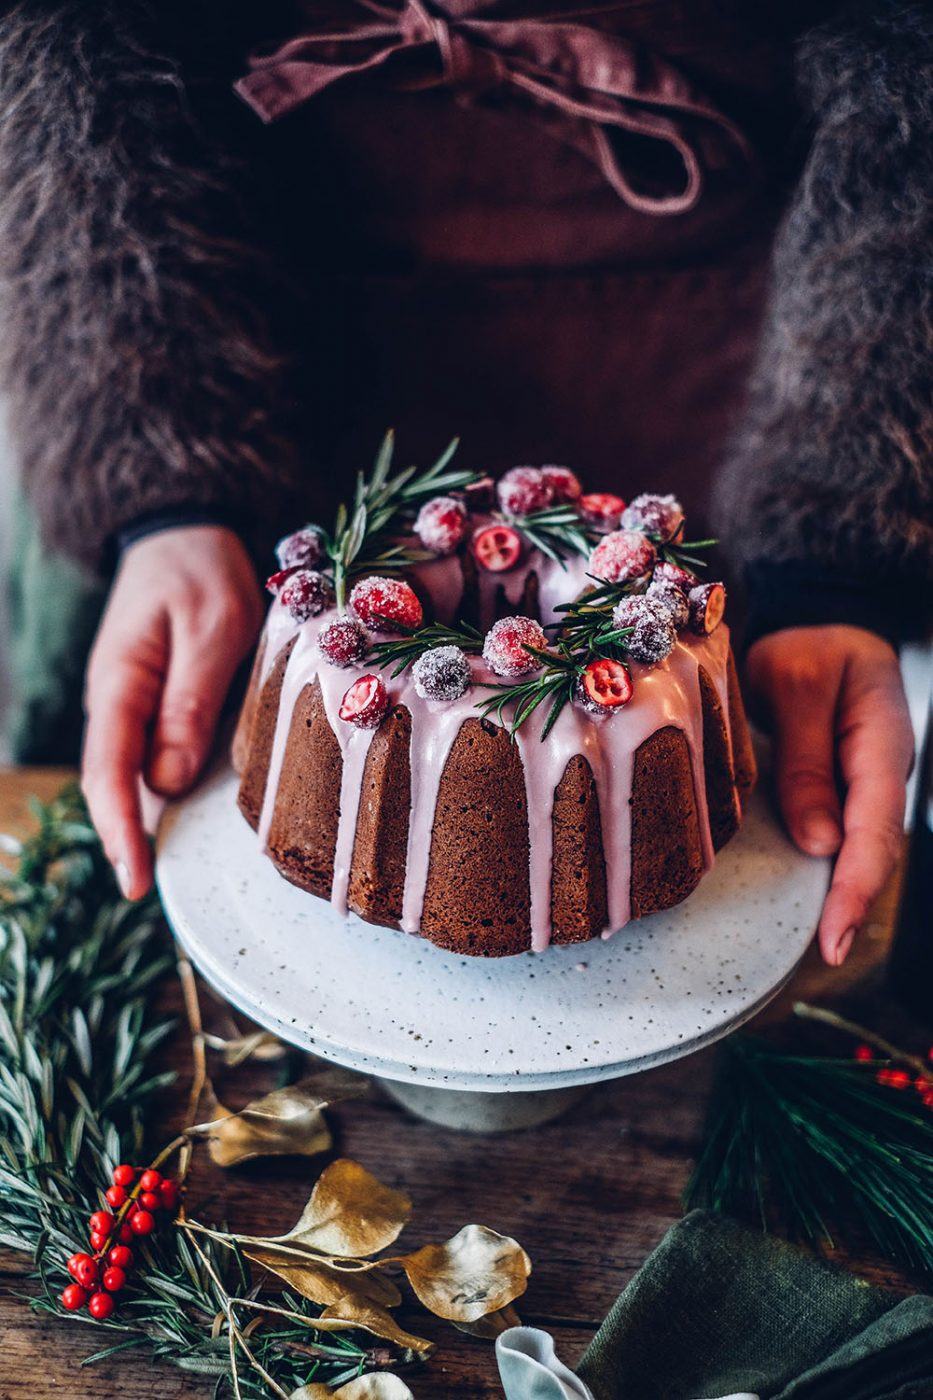 Image for A gluten-free Cranberry-Bundt Cake with Sugared Cranberries